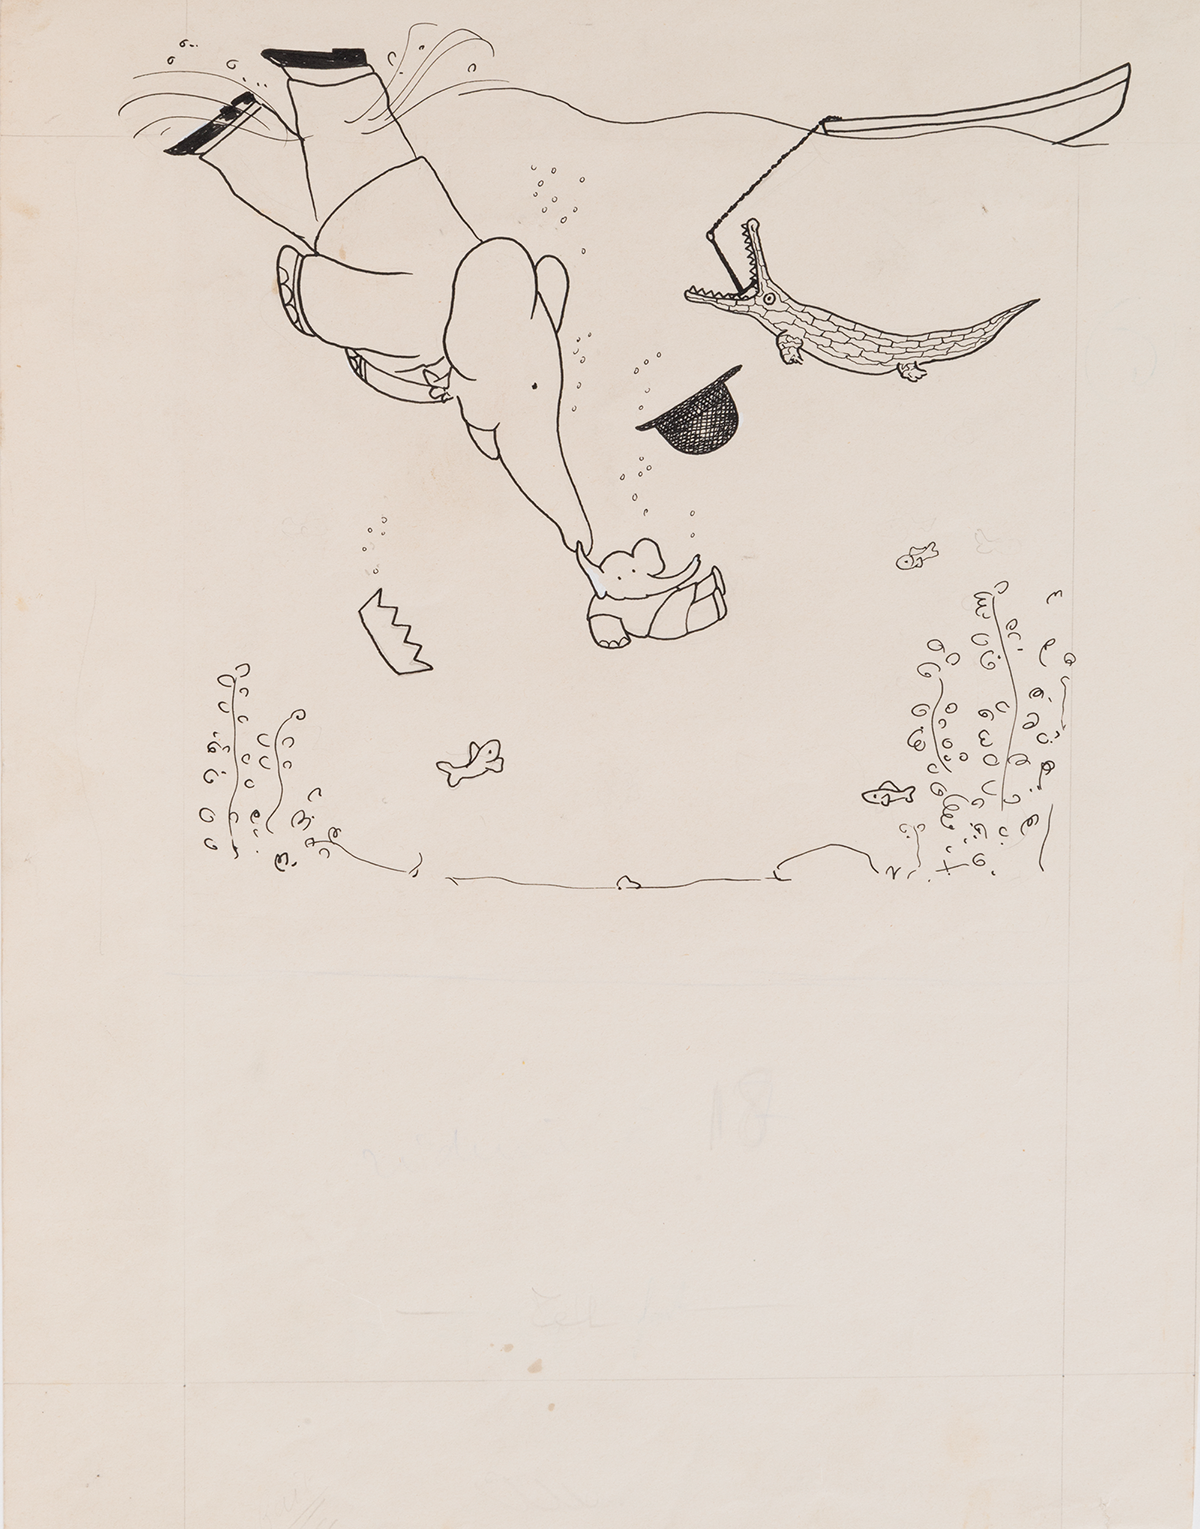 Babar dives in after him, and searches about with his trunk, c.1937, Ink and gouache, 14 1/8 x 10 5/8 inches (35.9 x 27 cm)